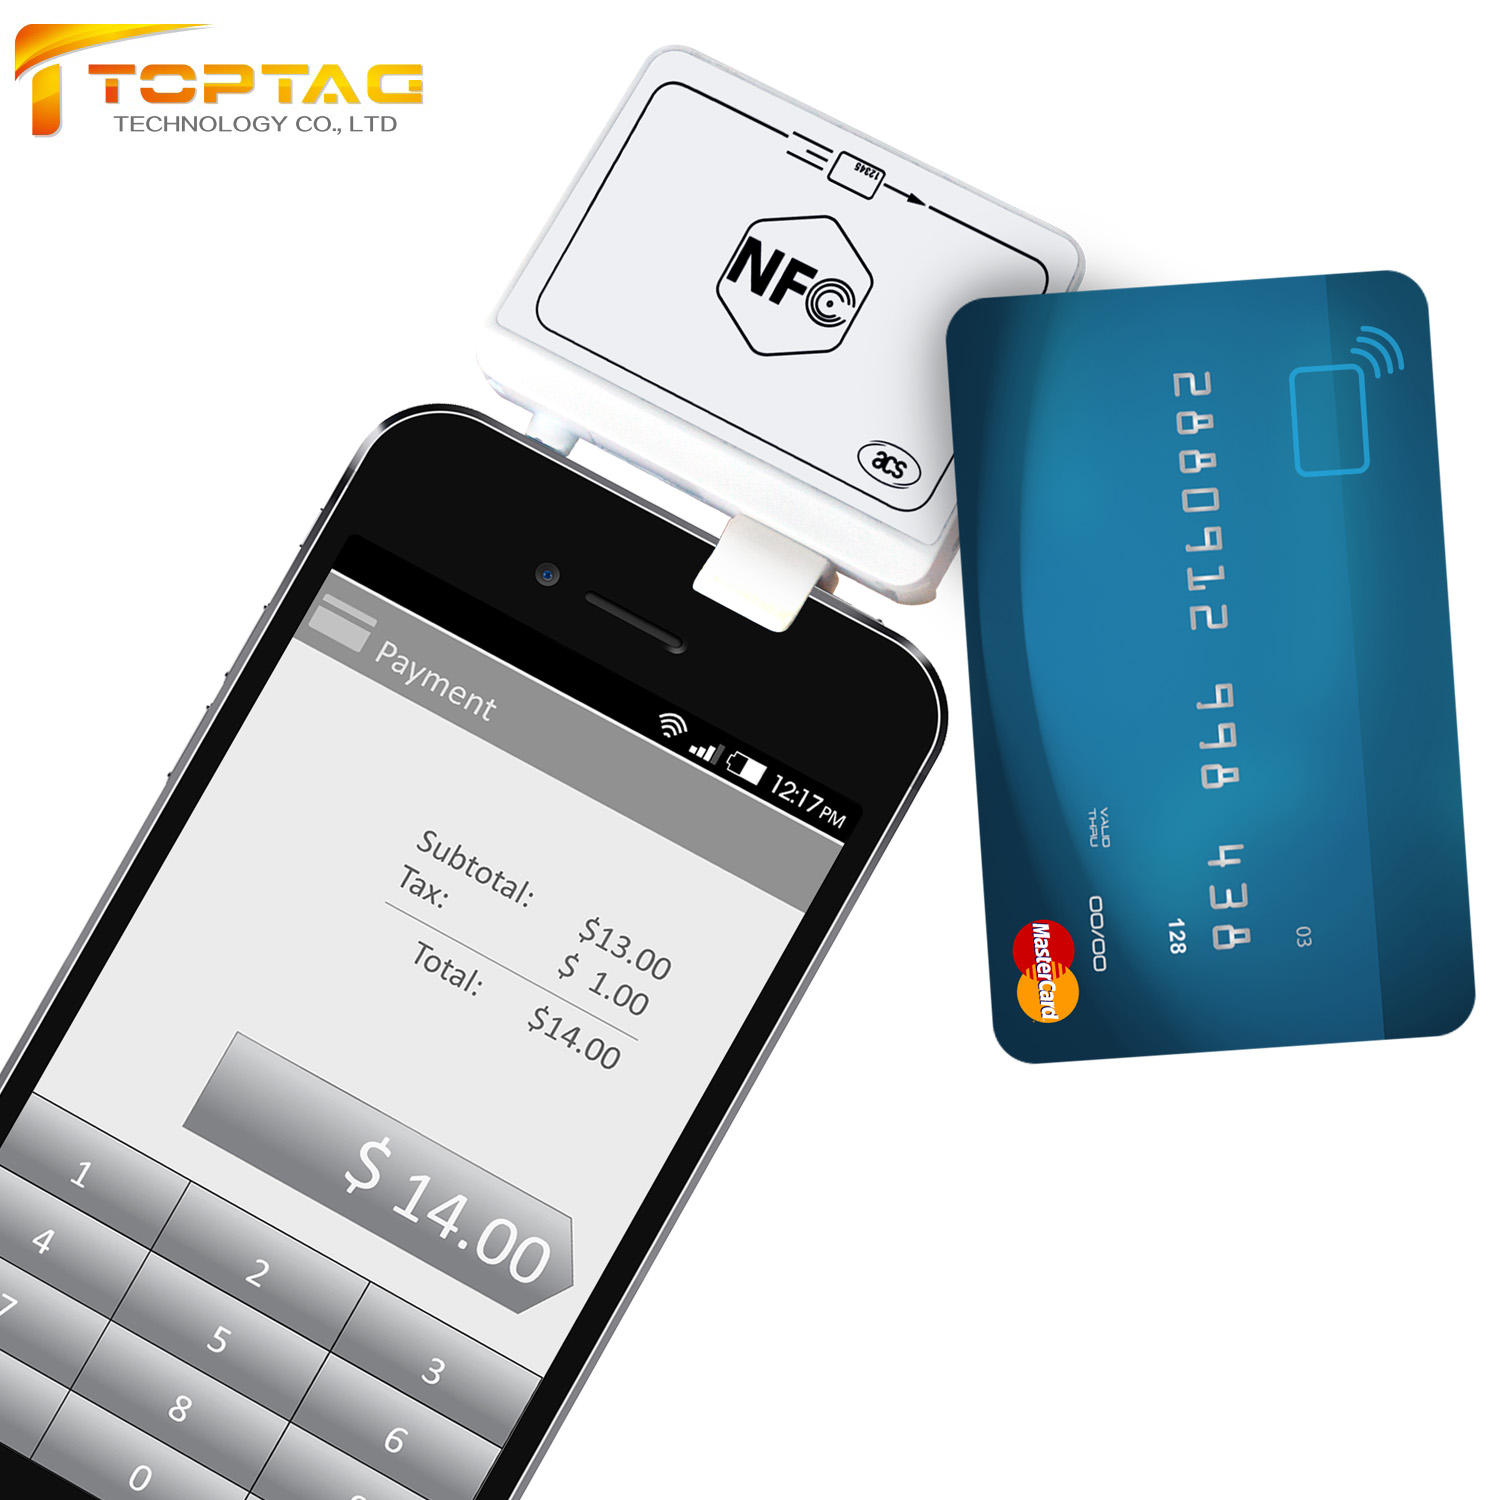 Factory Price ACR35 NFC MobileMate Card Reader for Mobile Banking Payment